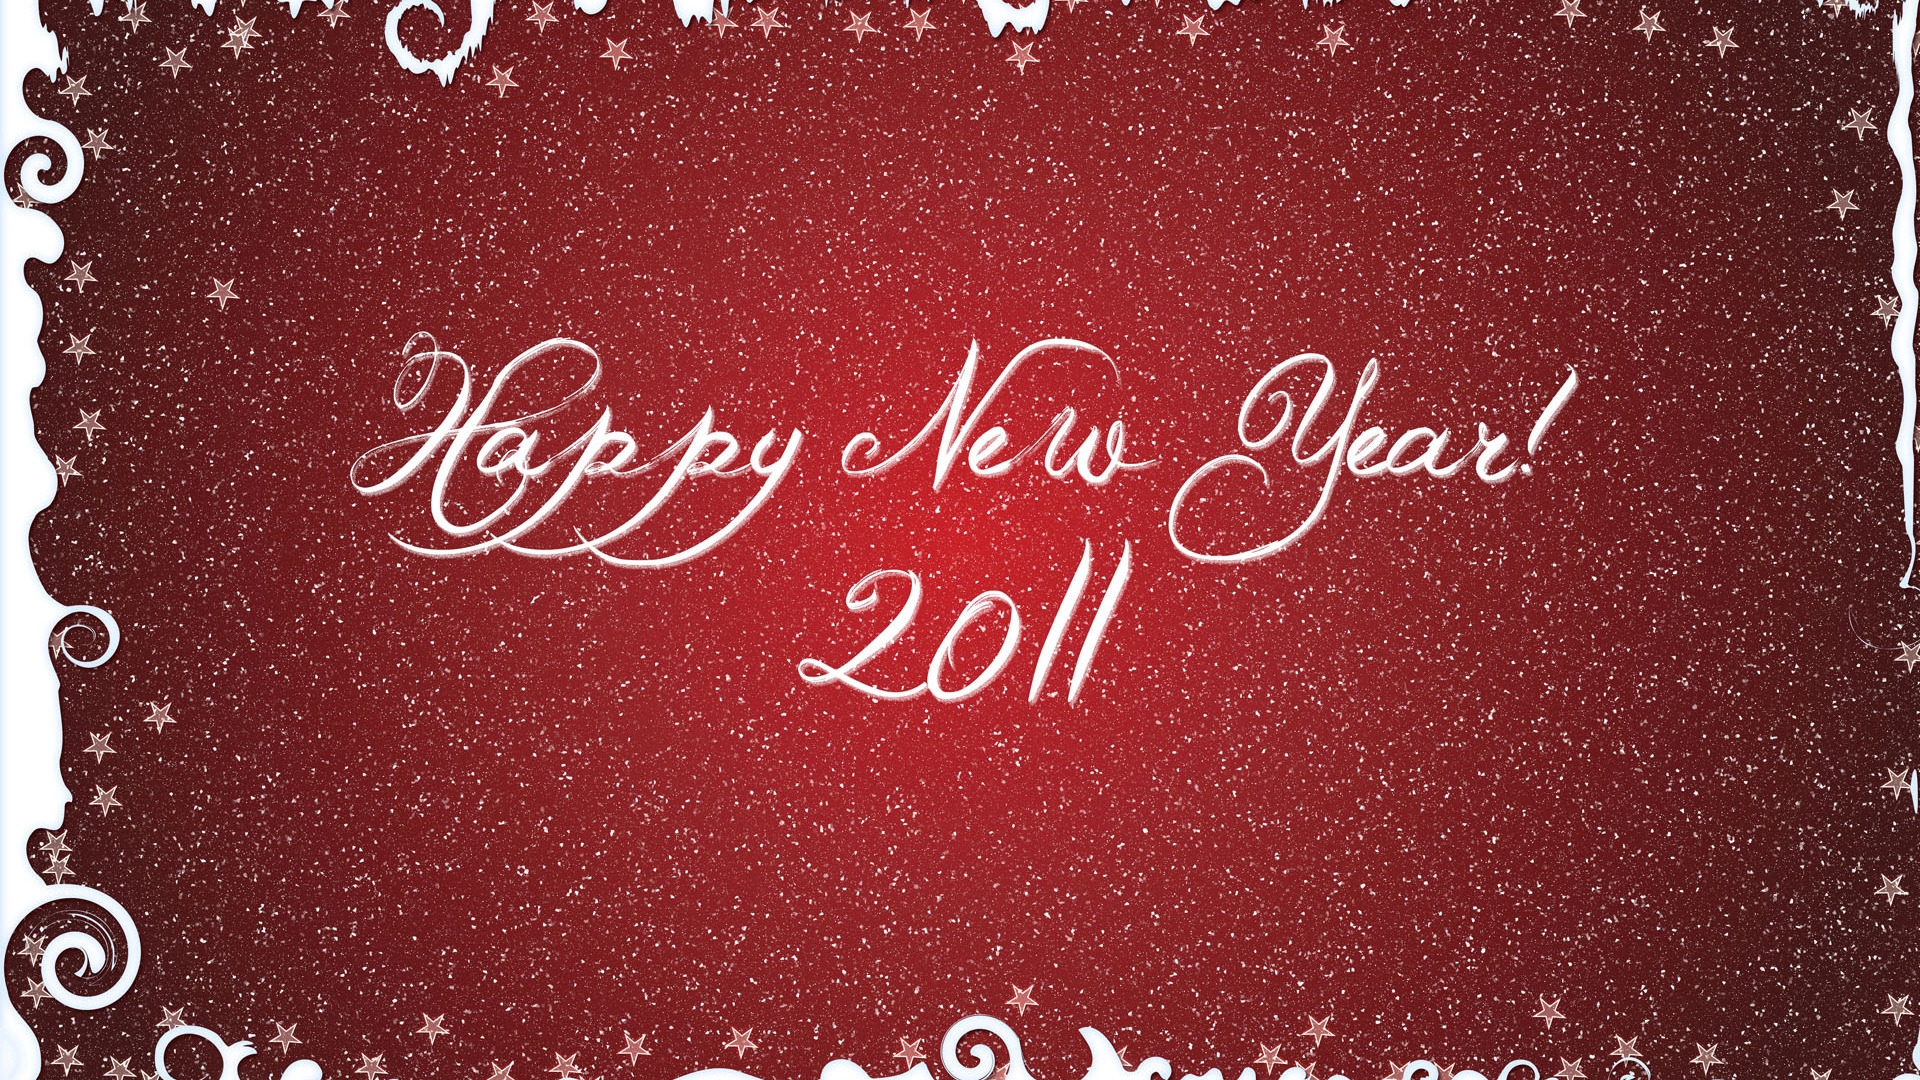 Happy New Year 2011 for 1920 x 1080 HDTV 1080p resolution